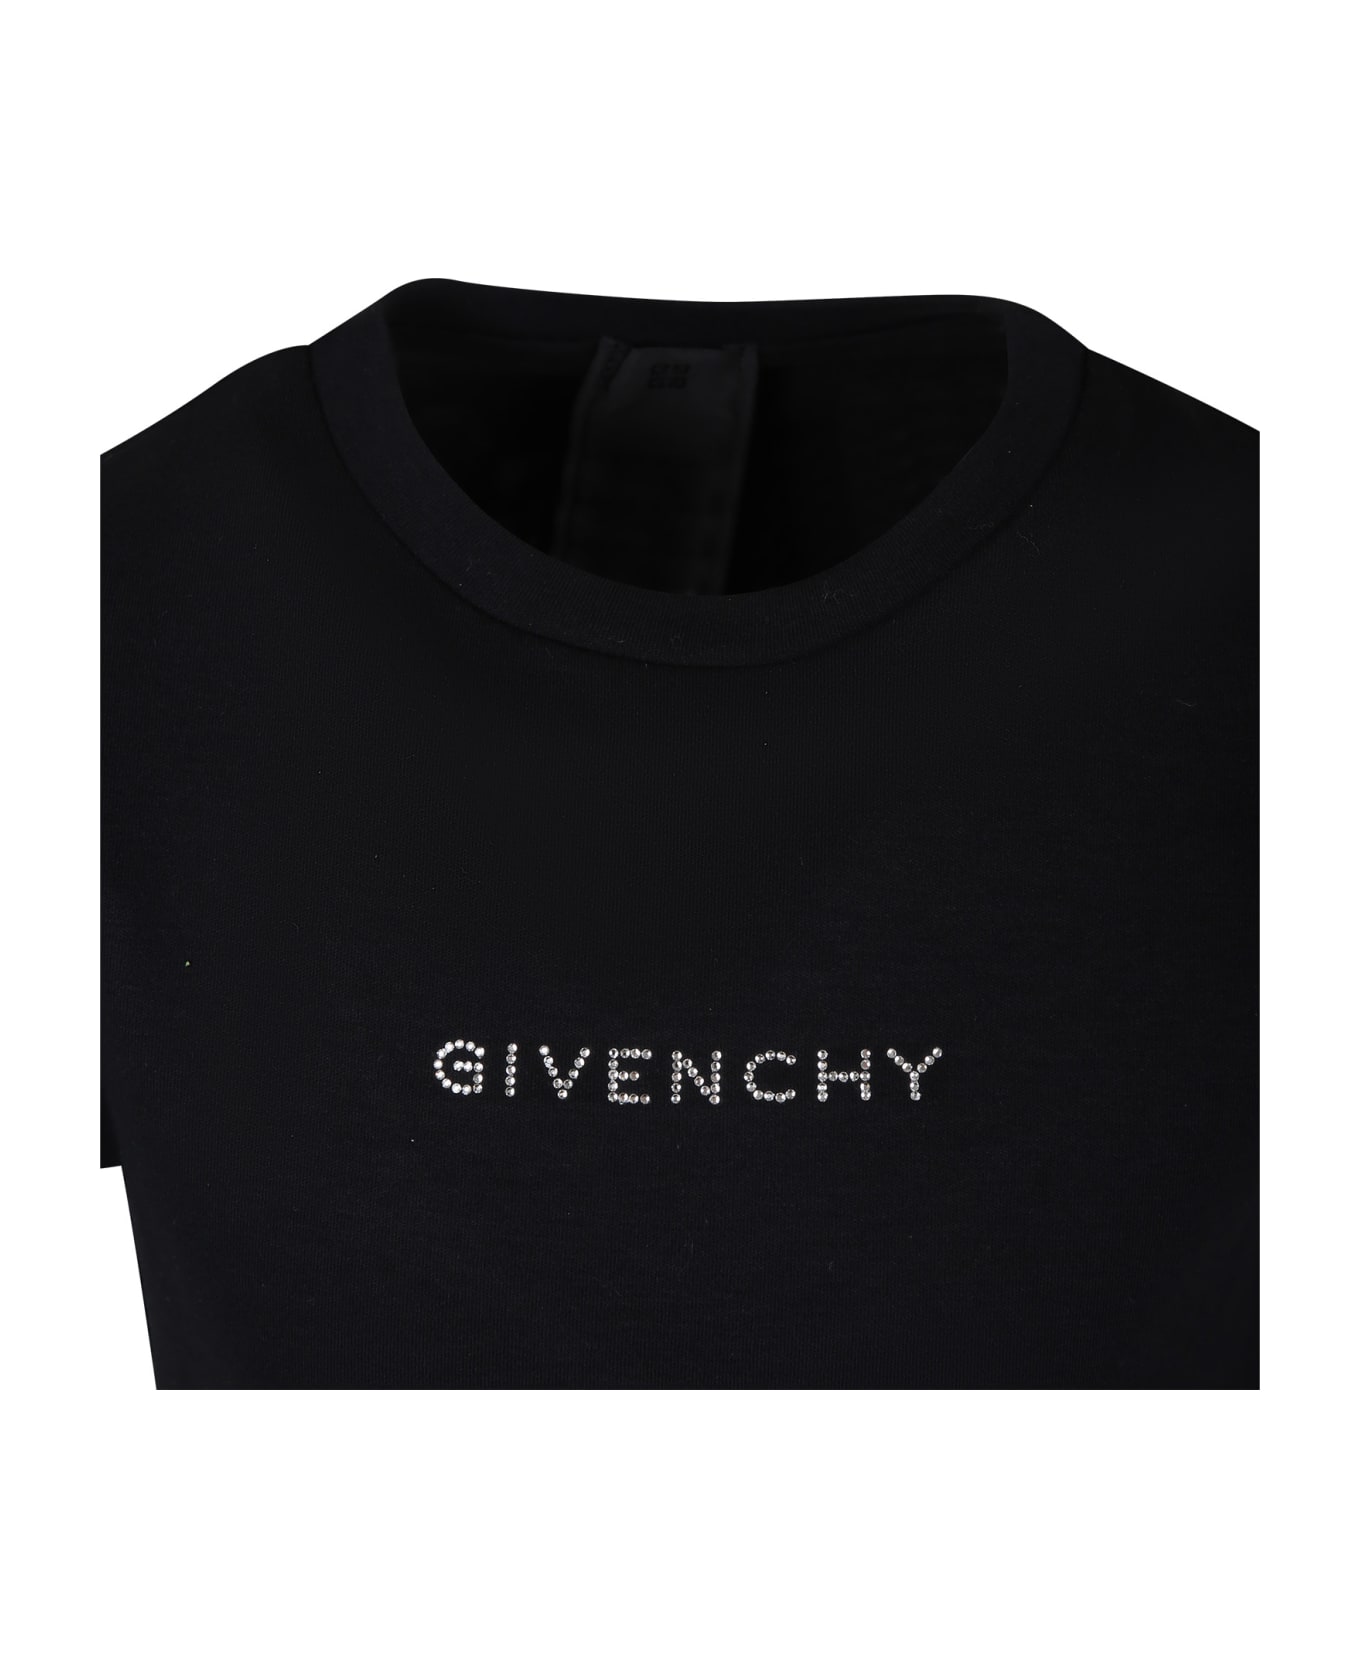 Givenchy Black T-shirt For Girl With Logo - Black